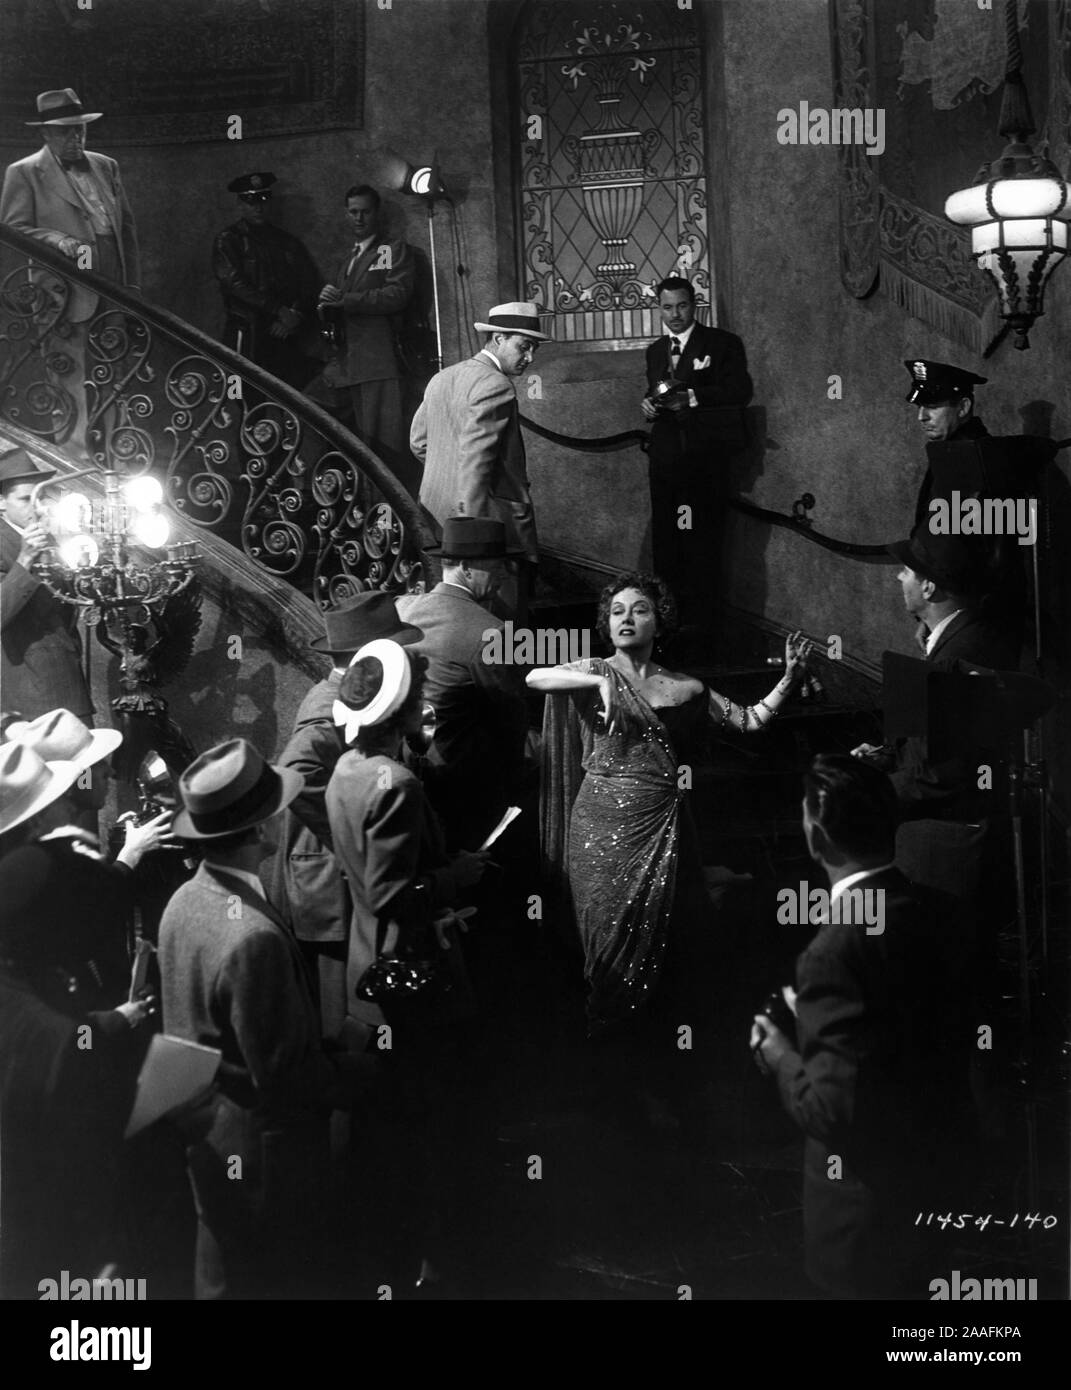 GLORIA SWANSON as Norma Desmond staircase finale with reporters news cameramen and policemen in SUNSET BOULEVARD 1950 director BILLY WILDER writers CHARLES BRACKETT BILLY WILDER and D. M. MARSHMAN Jr Costume design EDITH HEAD Paramount Pictures Stock Photo